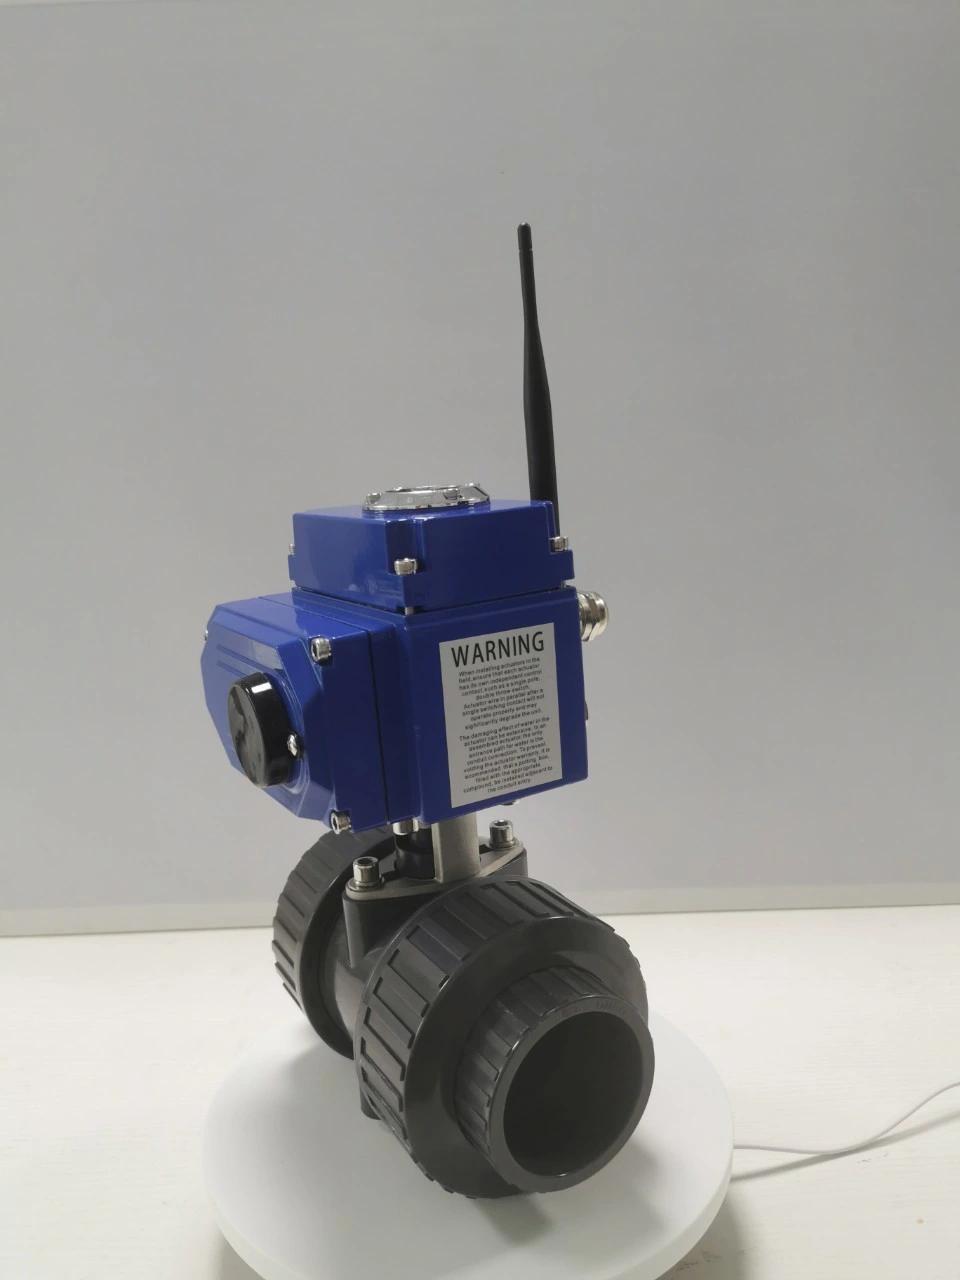 Valve Controller Remote Control by Mobile APP and Computer Industrial Valve Controller